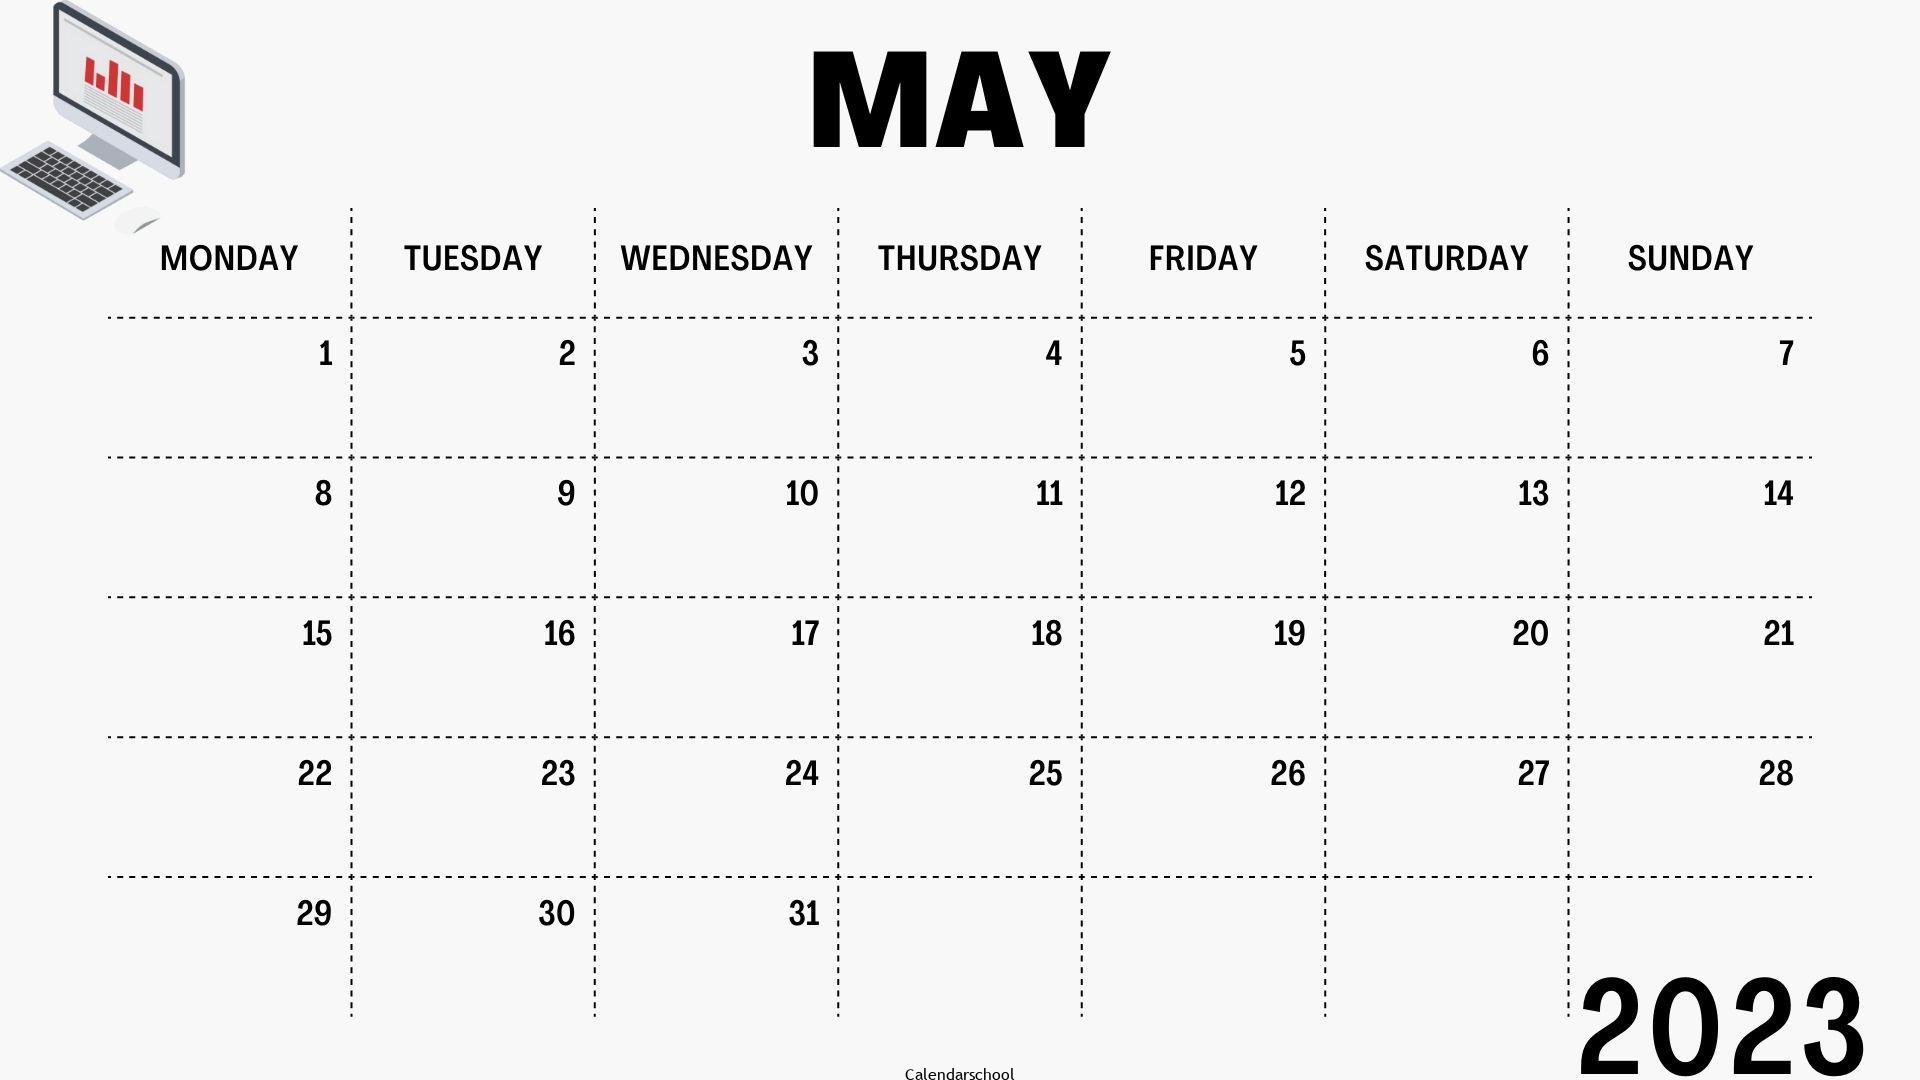 May 2023 Blank Monthly Calendar